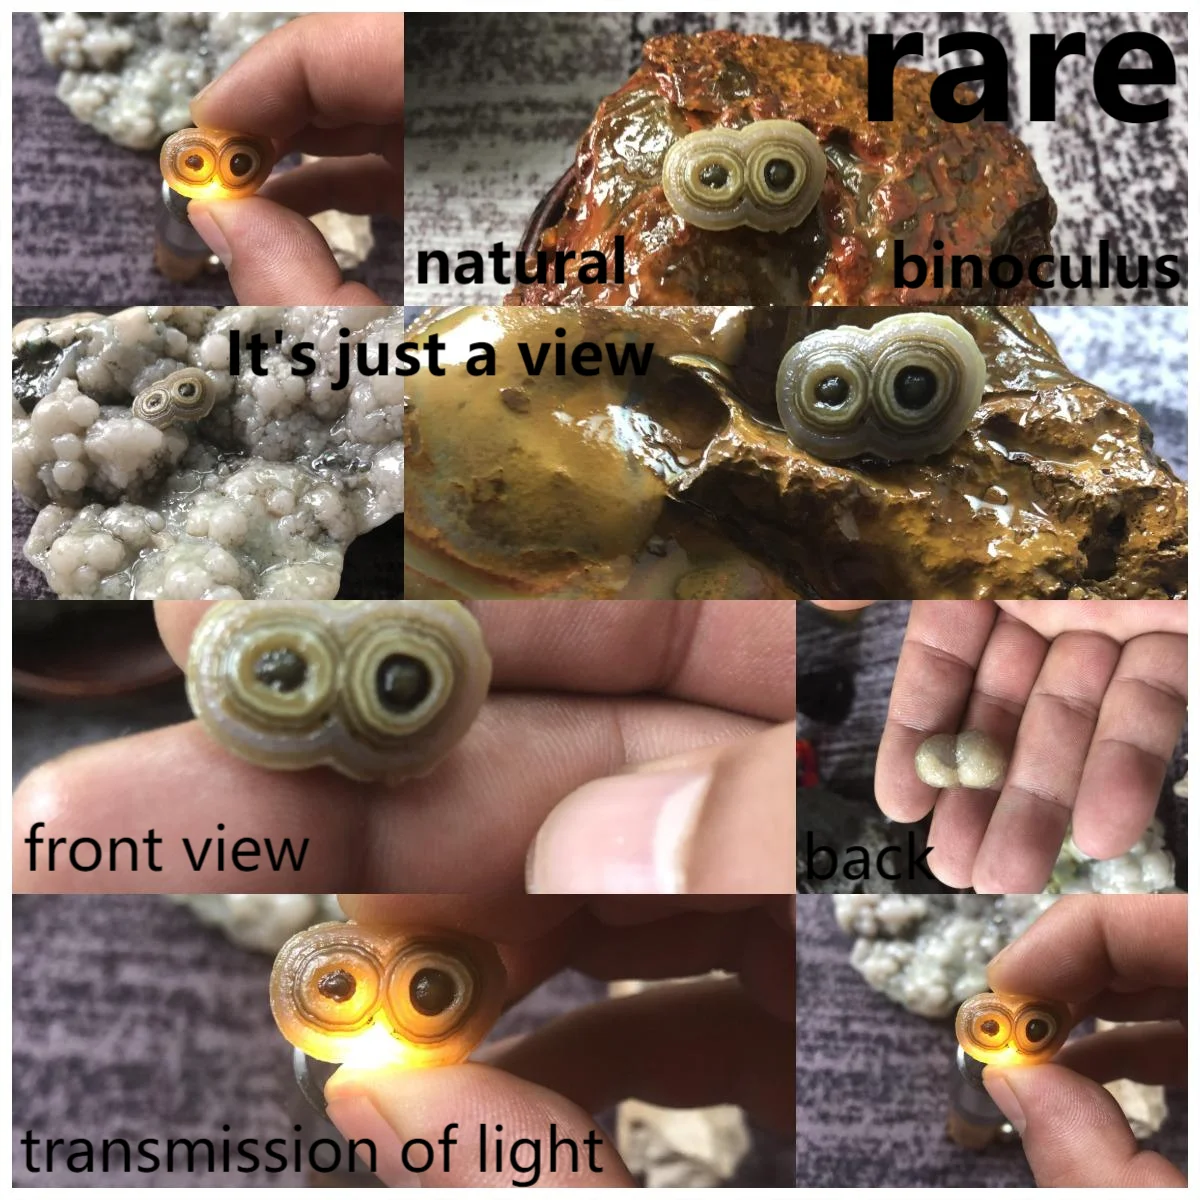 1Pcs Nature Stone Making Jewelry Of God Has Charms Gem Of Inner Mongolia Gobi Alxa Eye Stone Boutique All Selected God's Work jade dragon cross pendant gifts for women charm gift stone accessories natural jewelry fashion necklace green charms real man